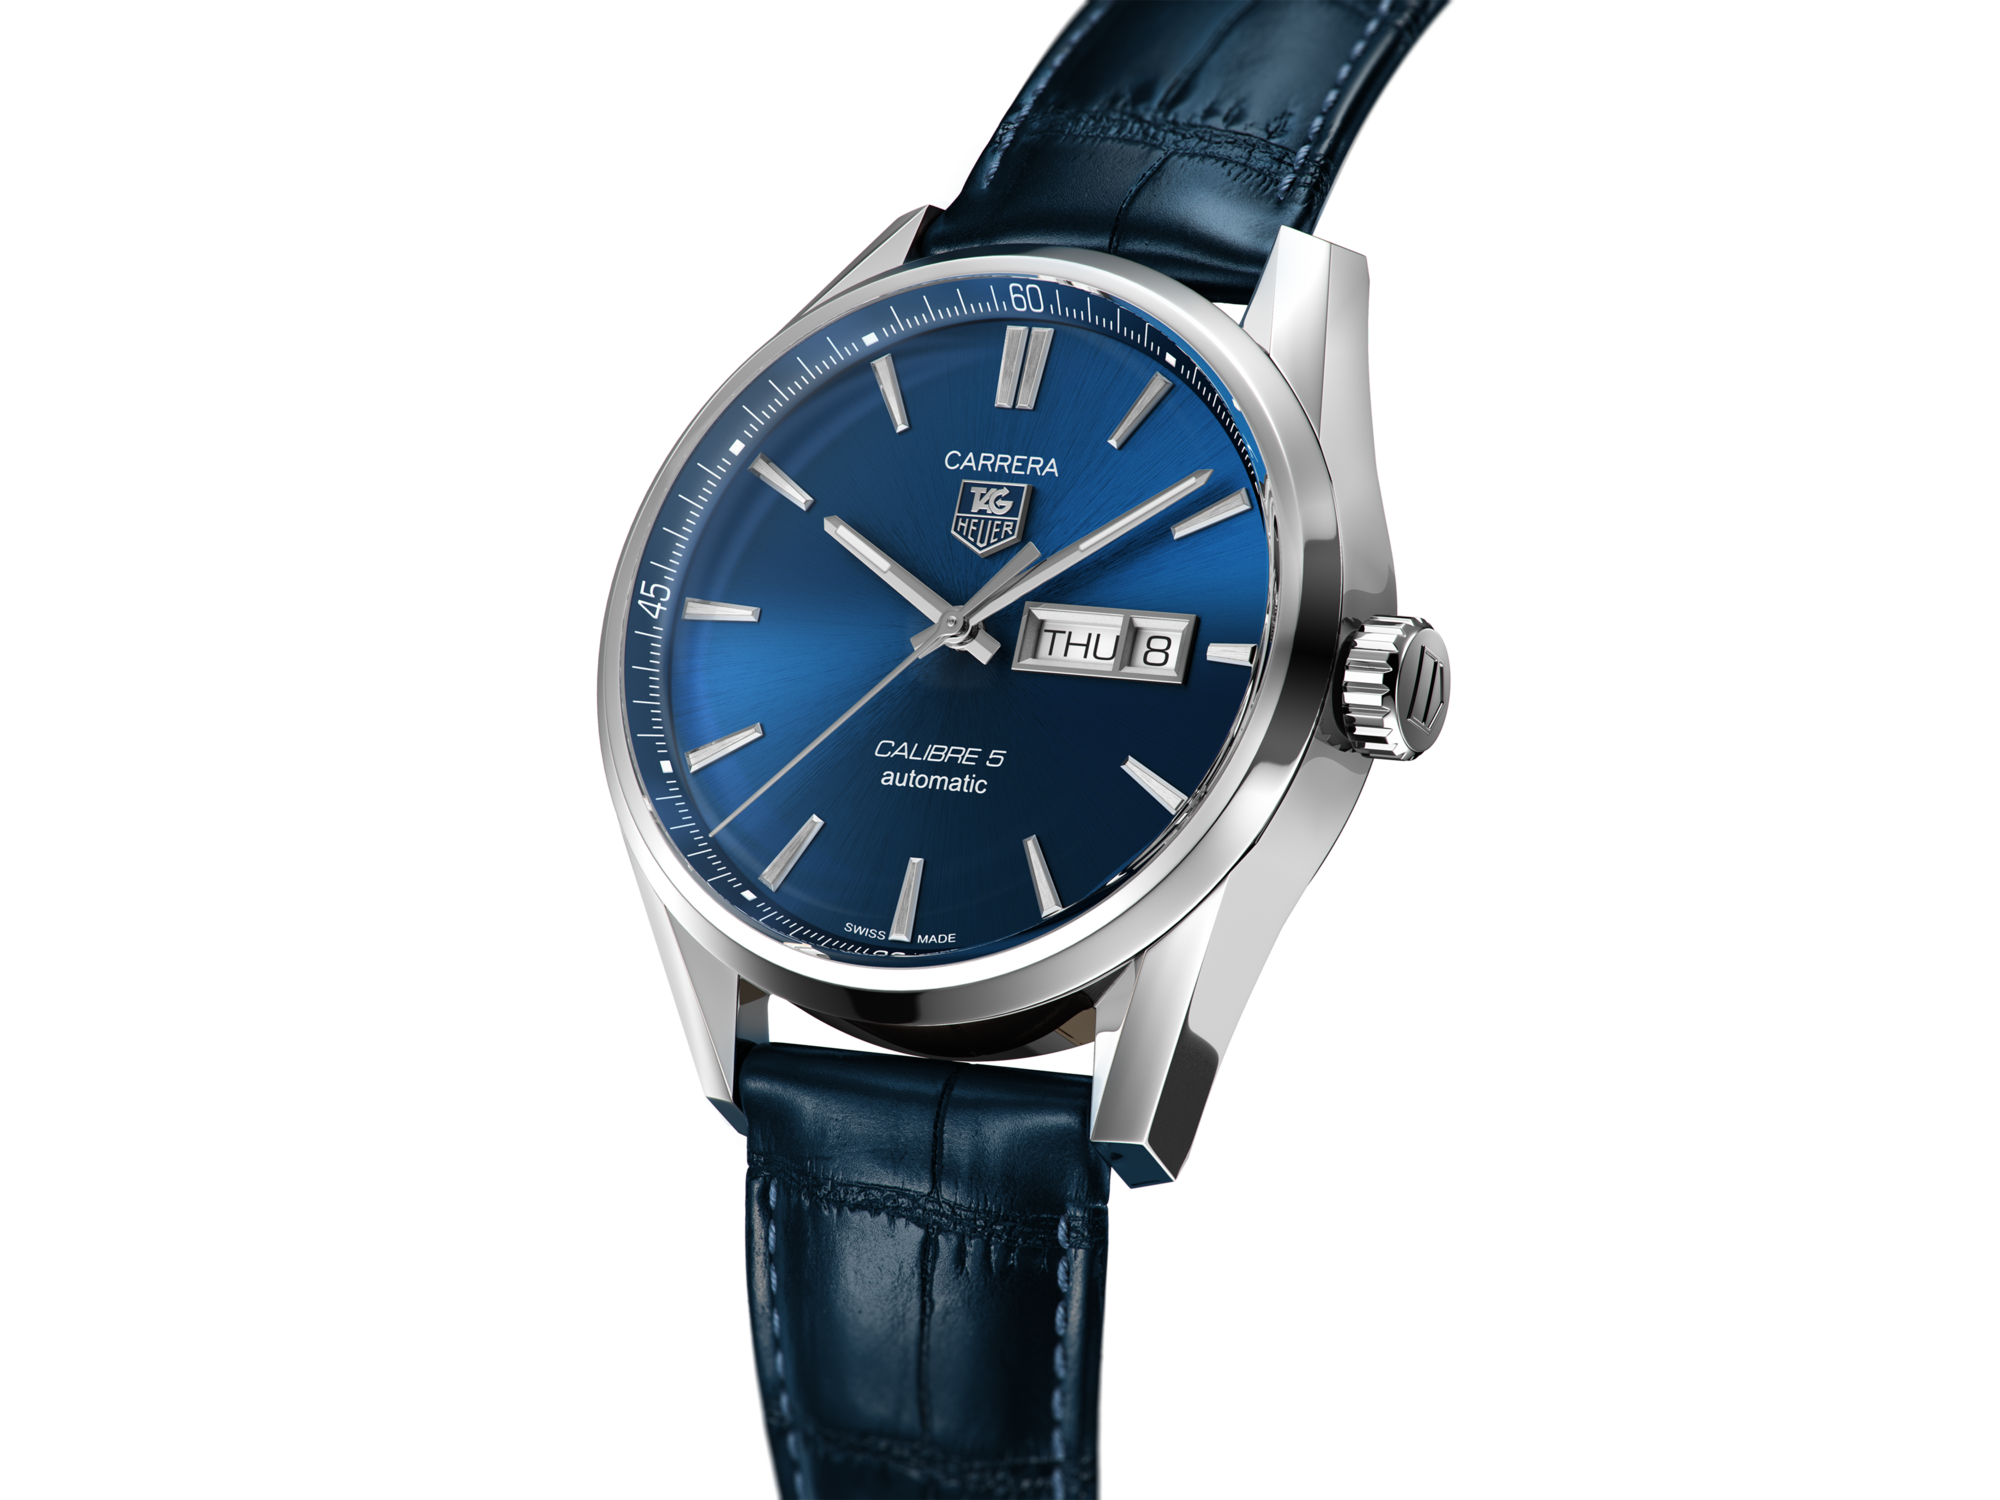 TAG Heuer TAG HEUER Carrera Calibre 5 Day-Date WAR201E. FC6292 Blue Dial New Watch Men's Watch